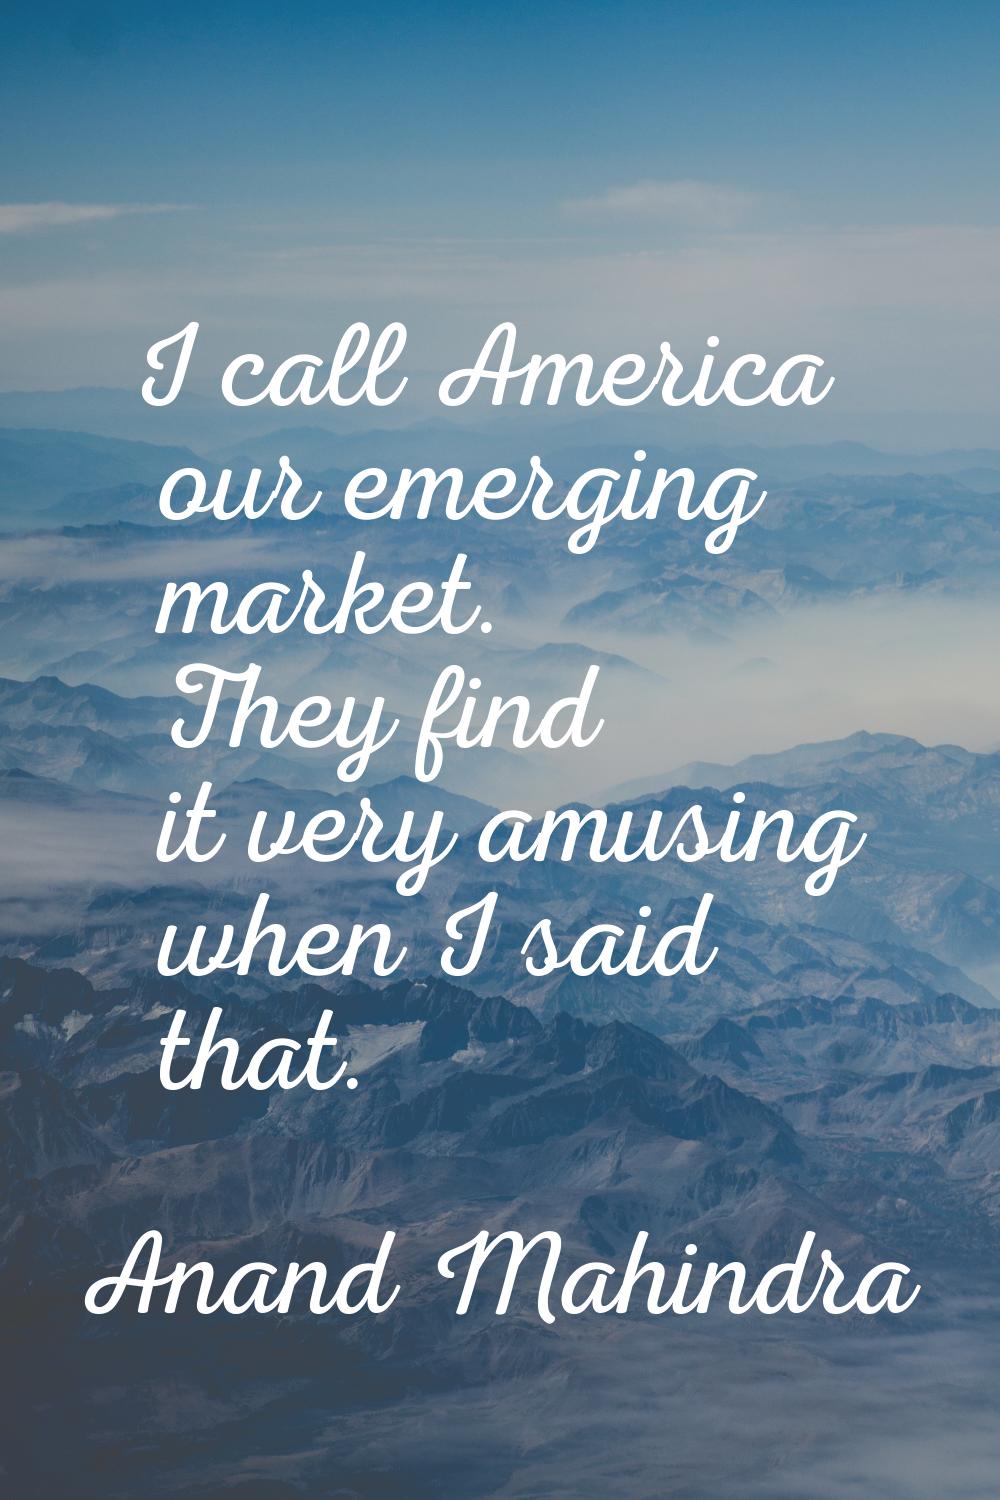 I call America our emerging market. They find it very amusing when I said that.